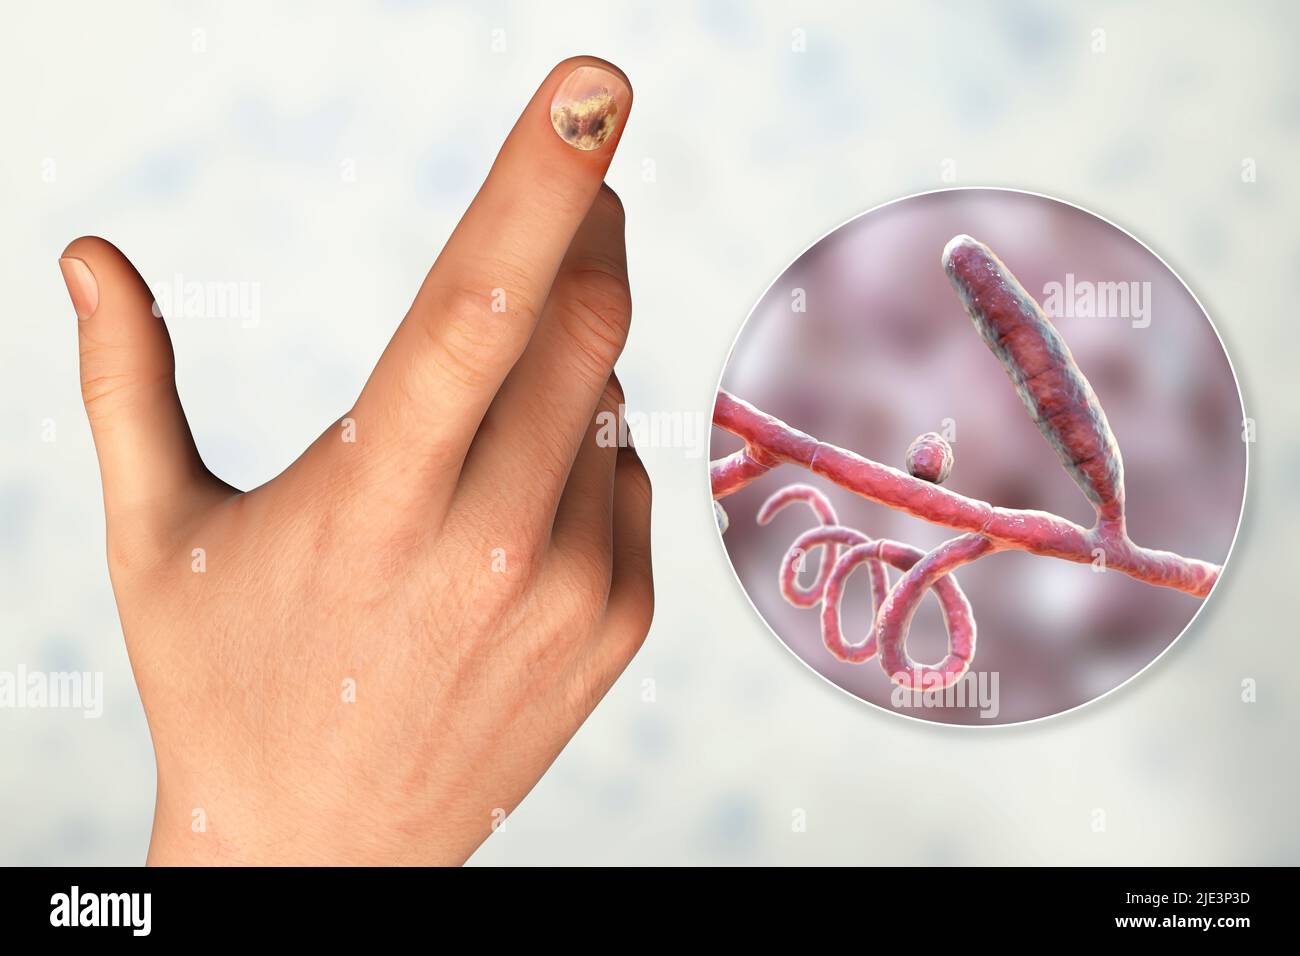 Nail Fungus Infection on the Big Finger. Fungal Infection on Nails Hand,  Finger with Onychomycosis Stock Image - Image of close, human: 123697079